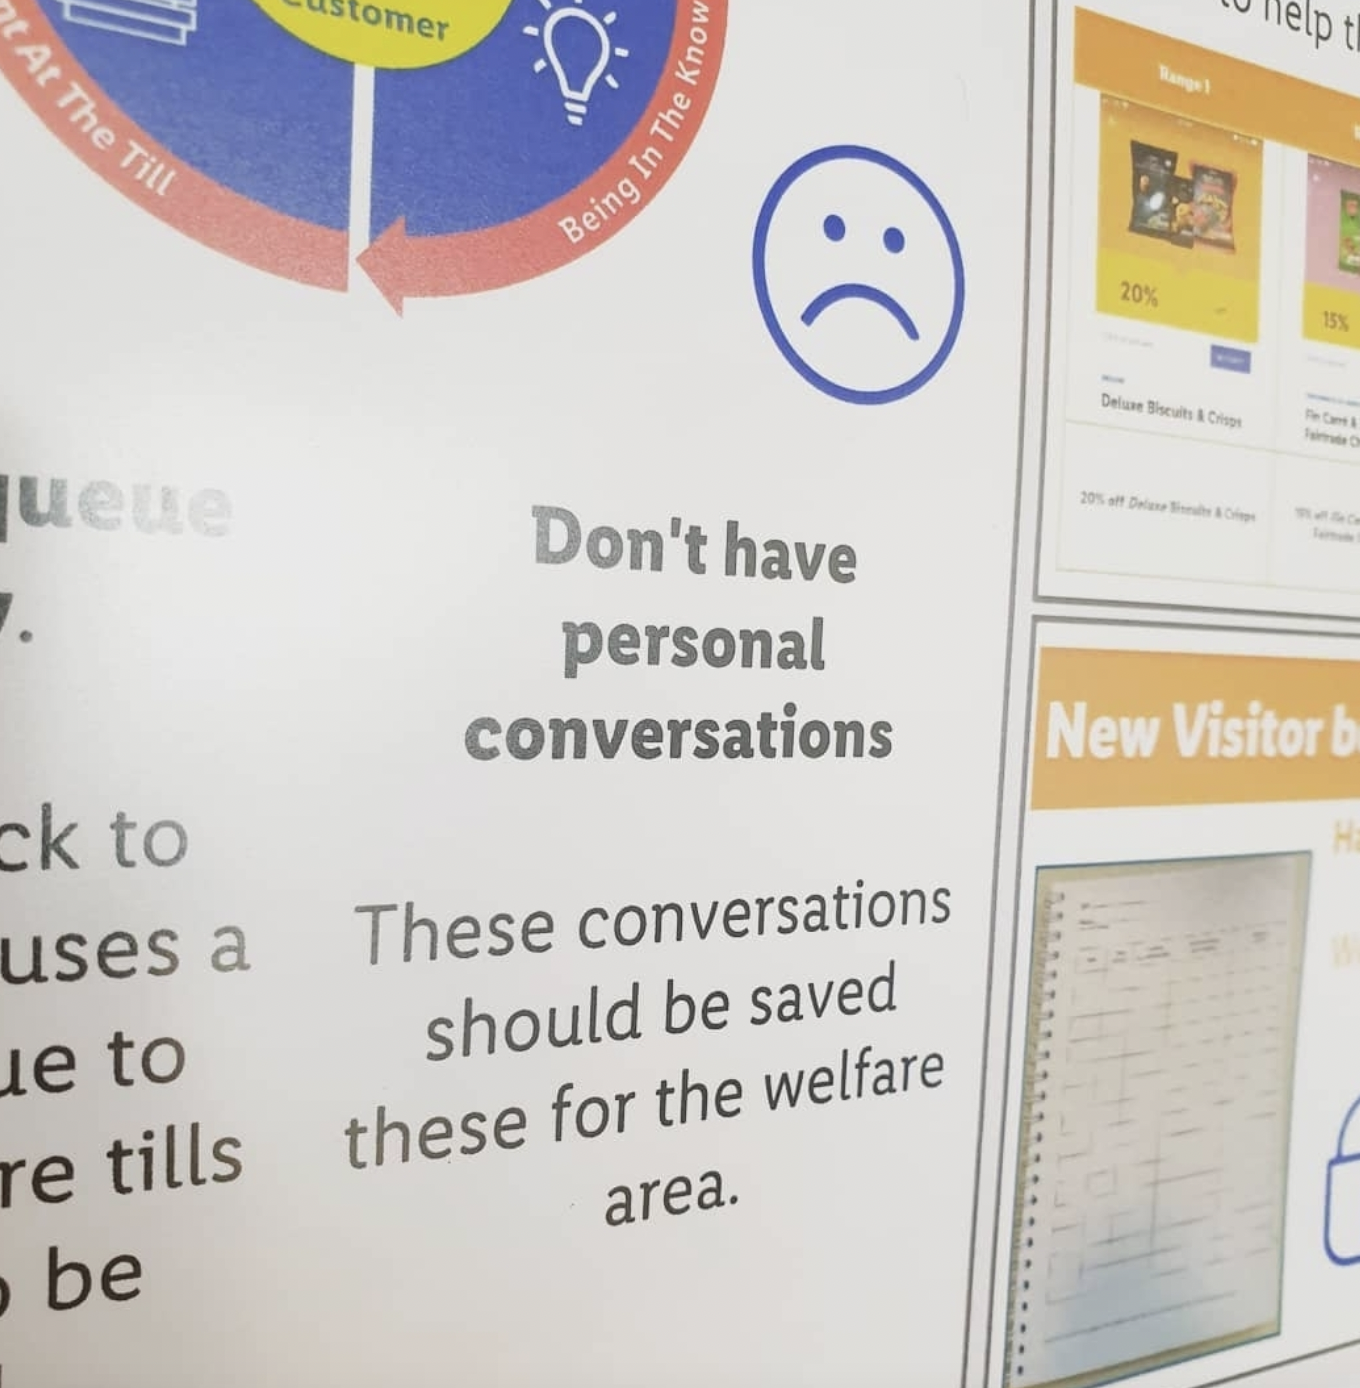 signage - At The Till tomer D Being In ueue . Don't have personal conversations 20% elp ck to New Visitor b uses a These conversations ue to should be saved Te tills these for the welfare be area.